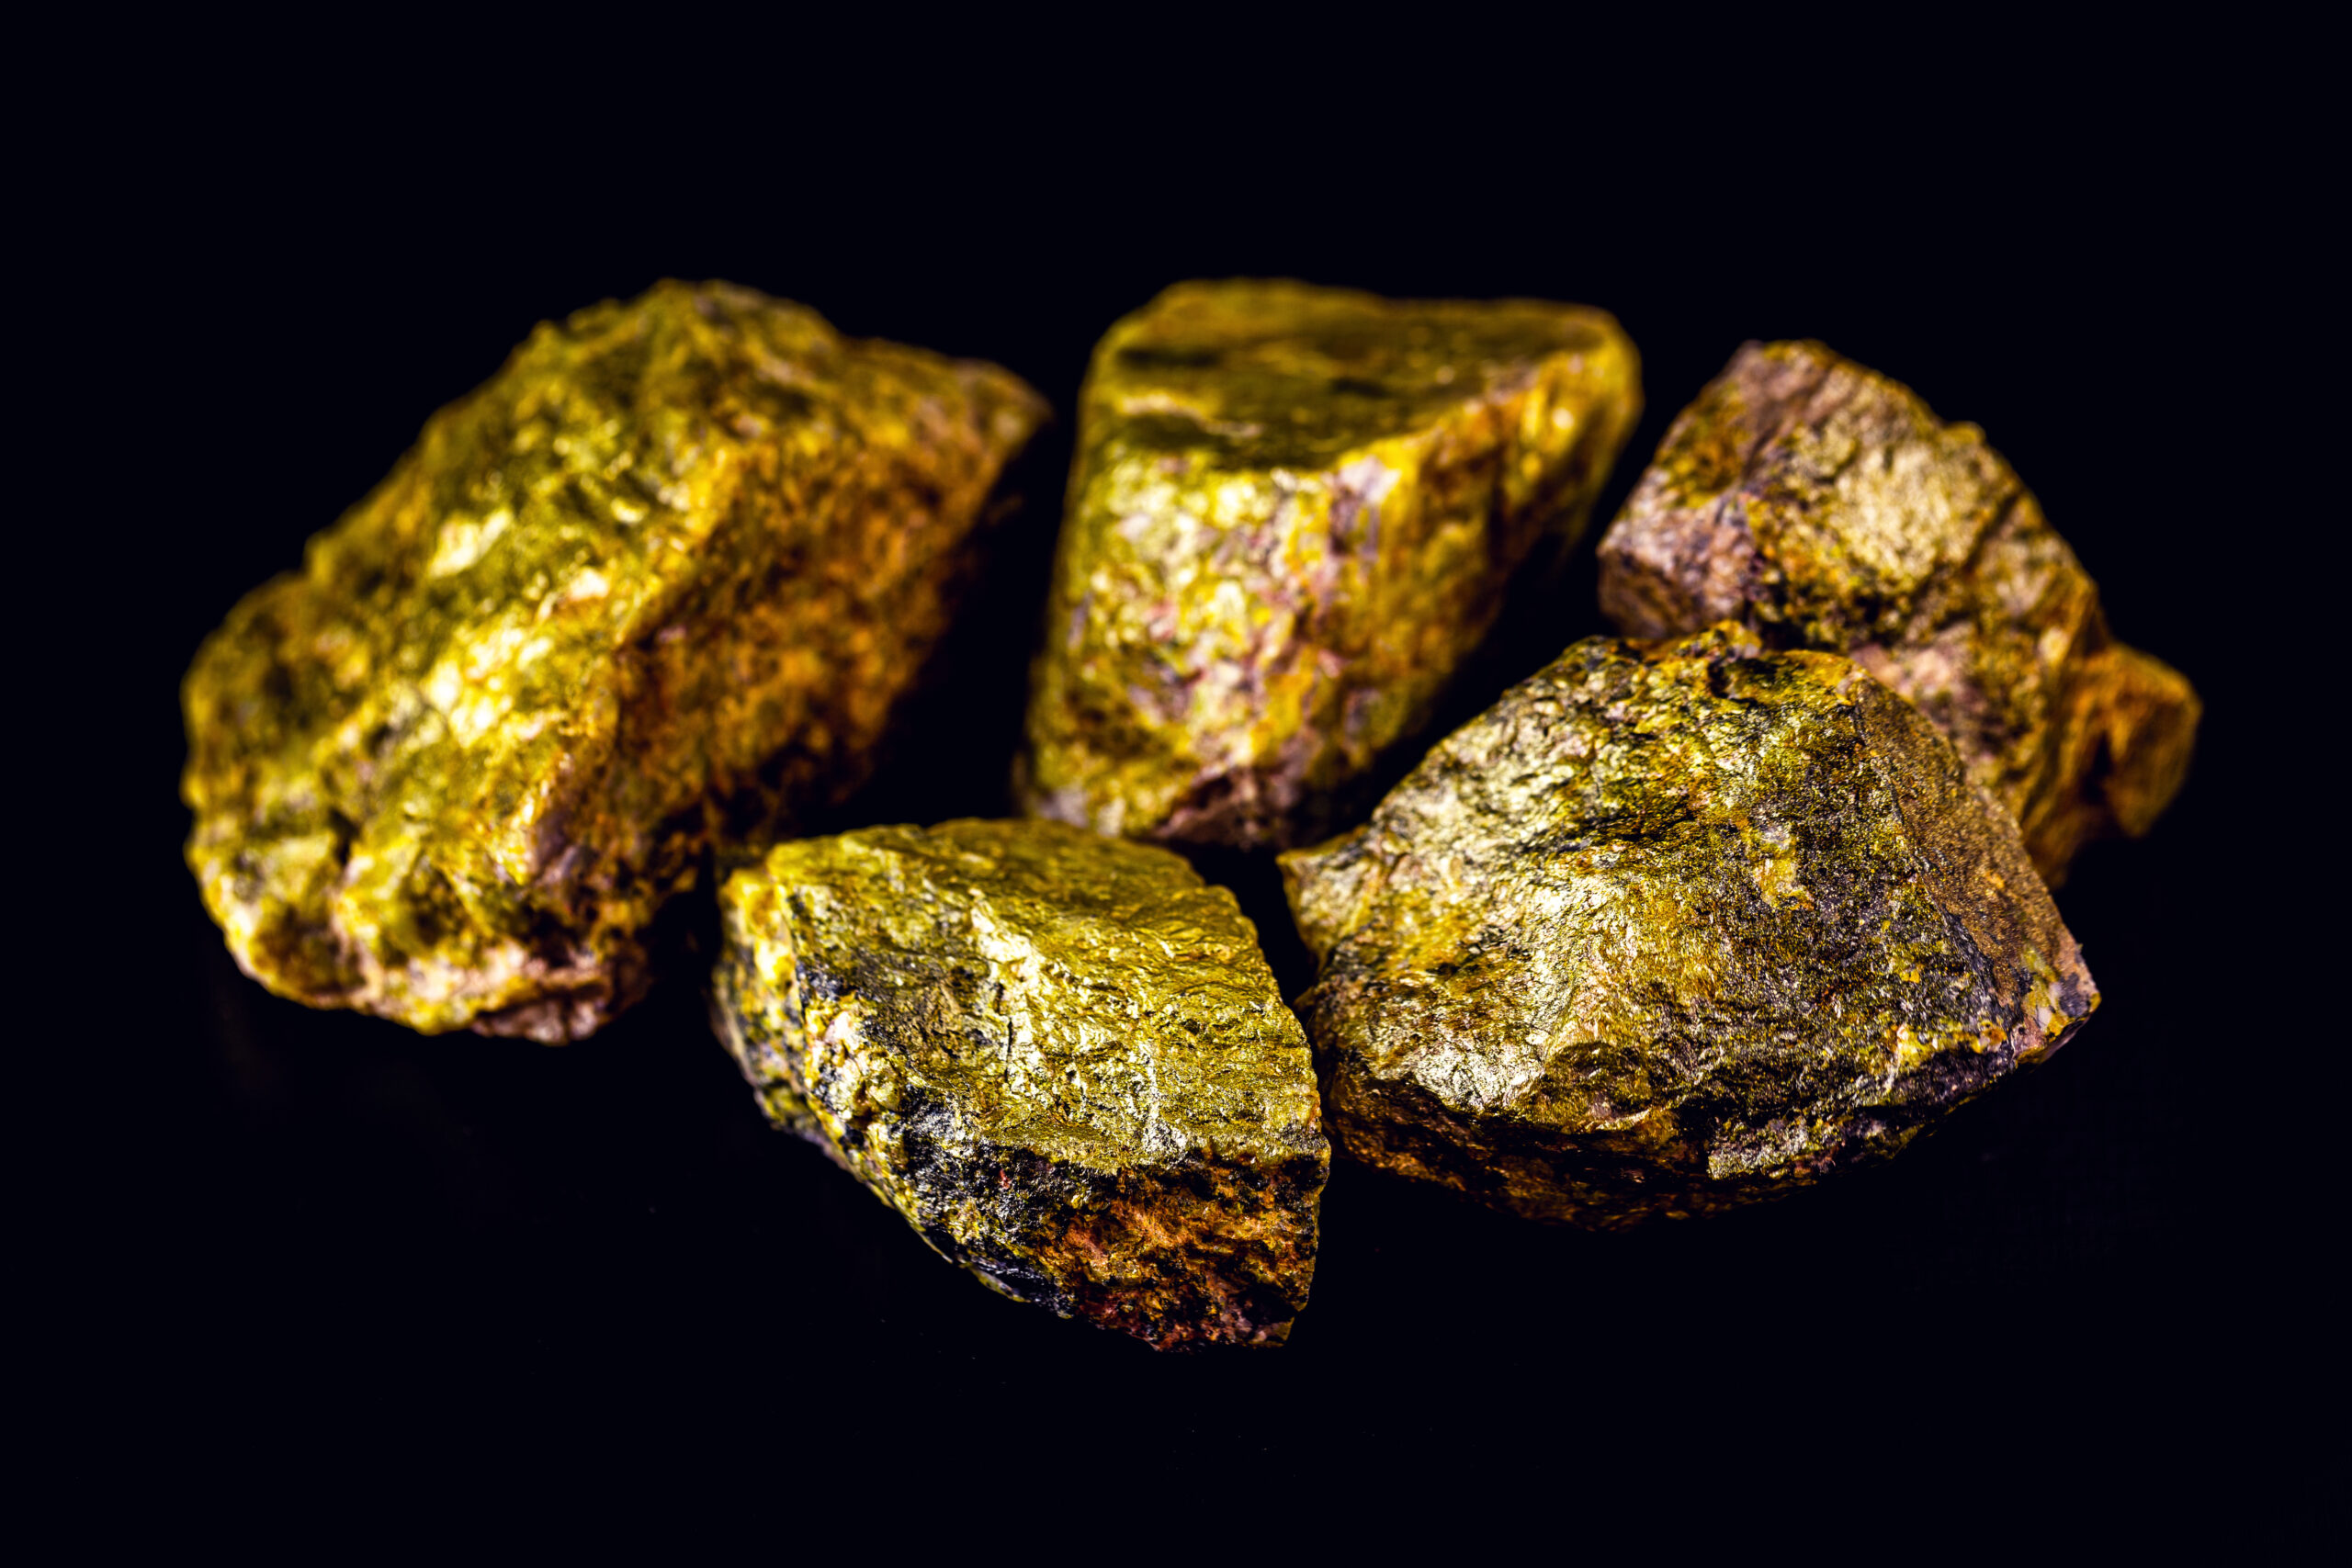 Uranium, a chemical element with a U symbol and an atomic mass equal to 238 u, RHJPhtotos (Shutterstock)